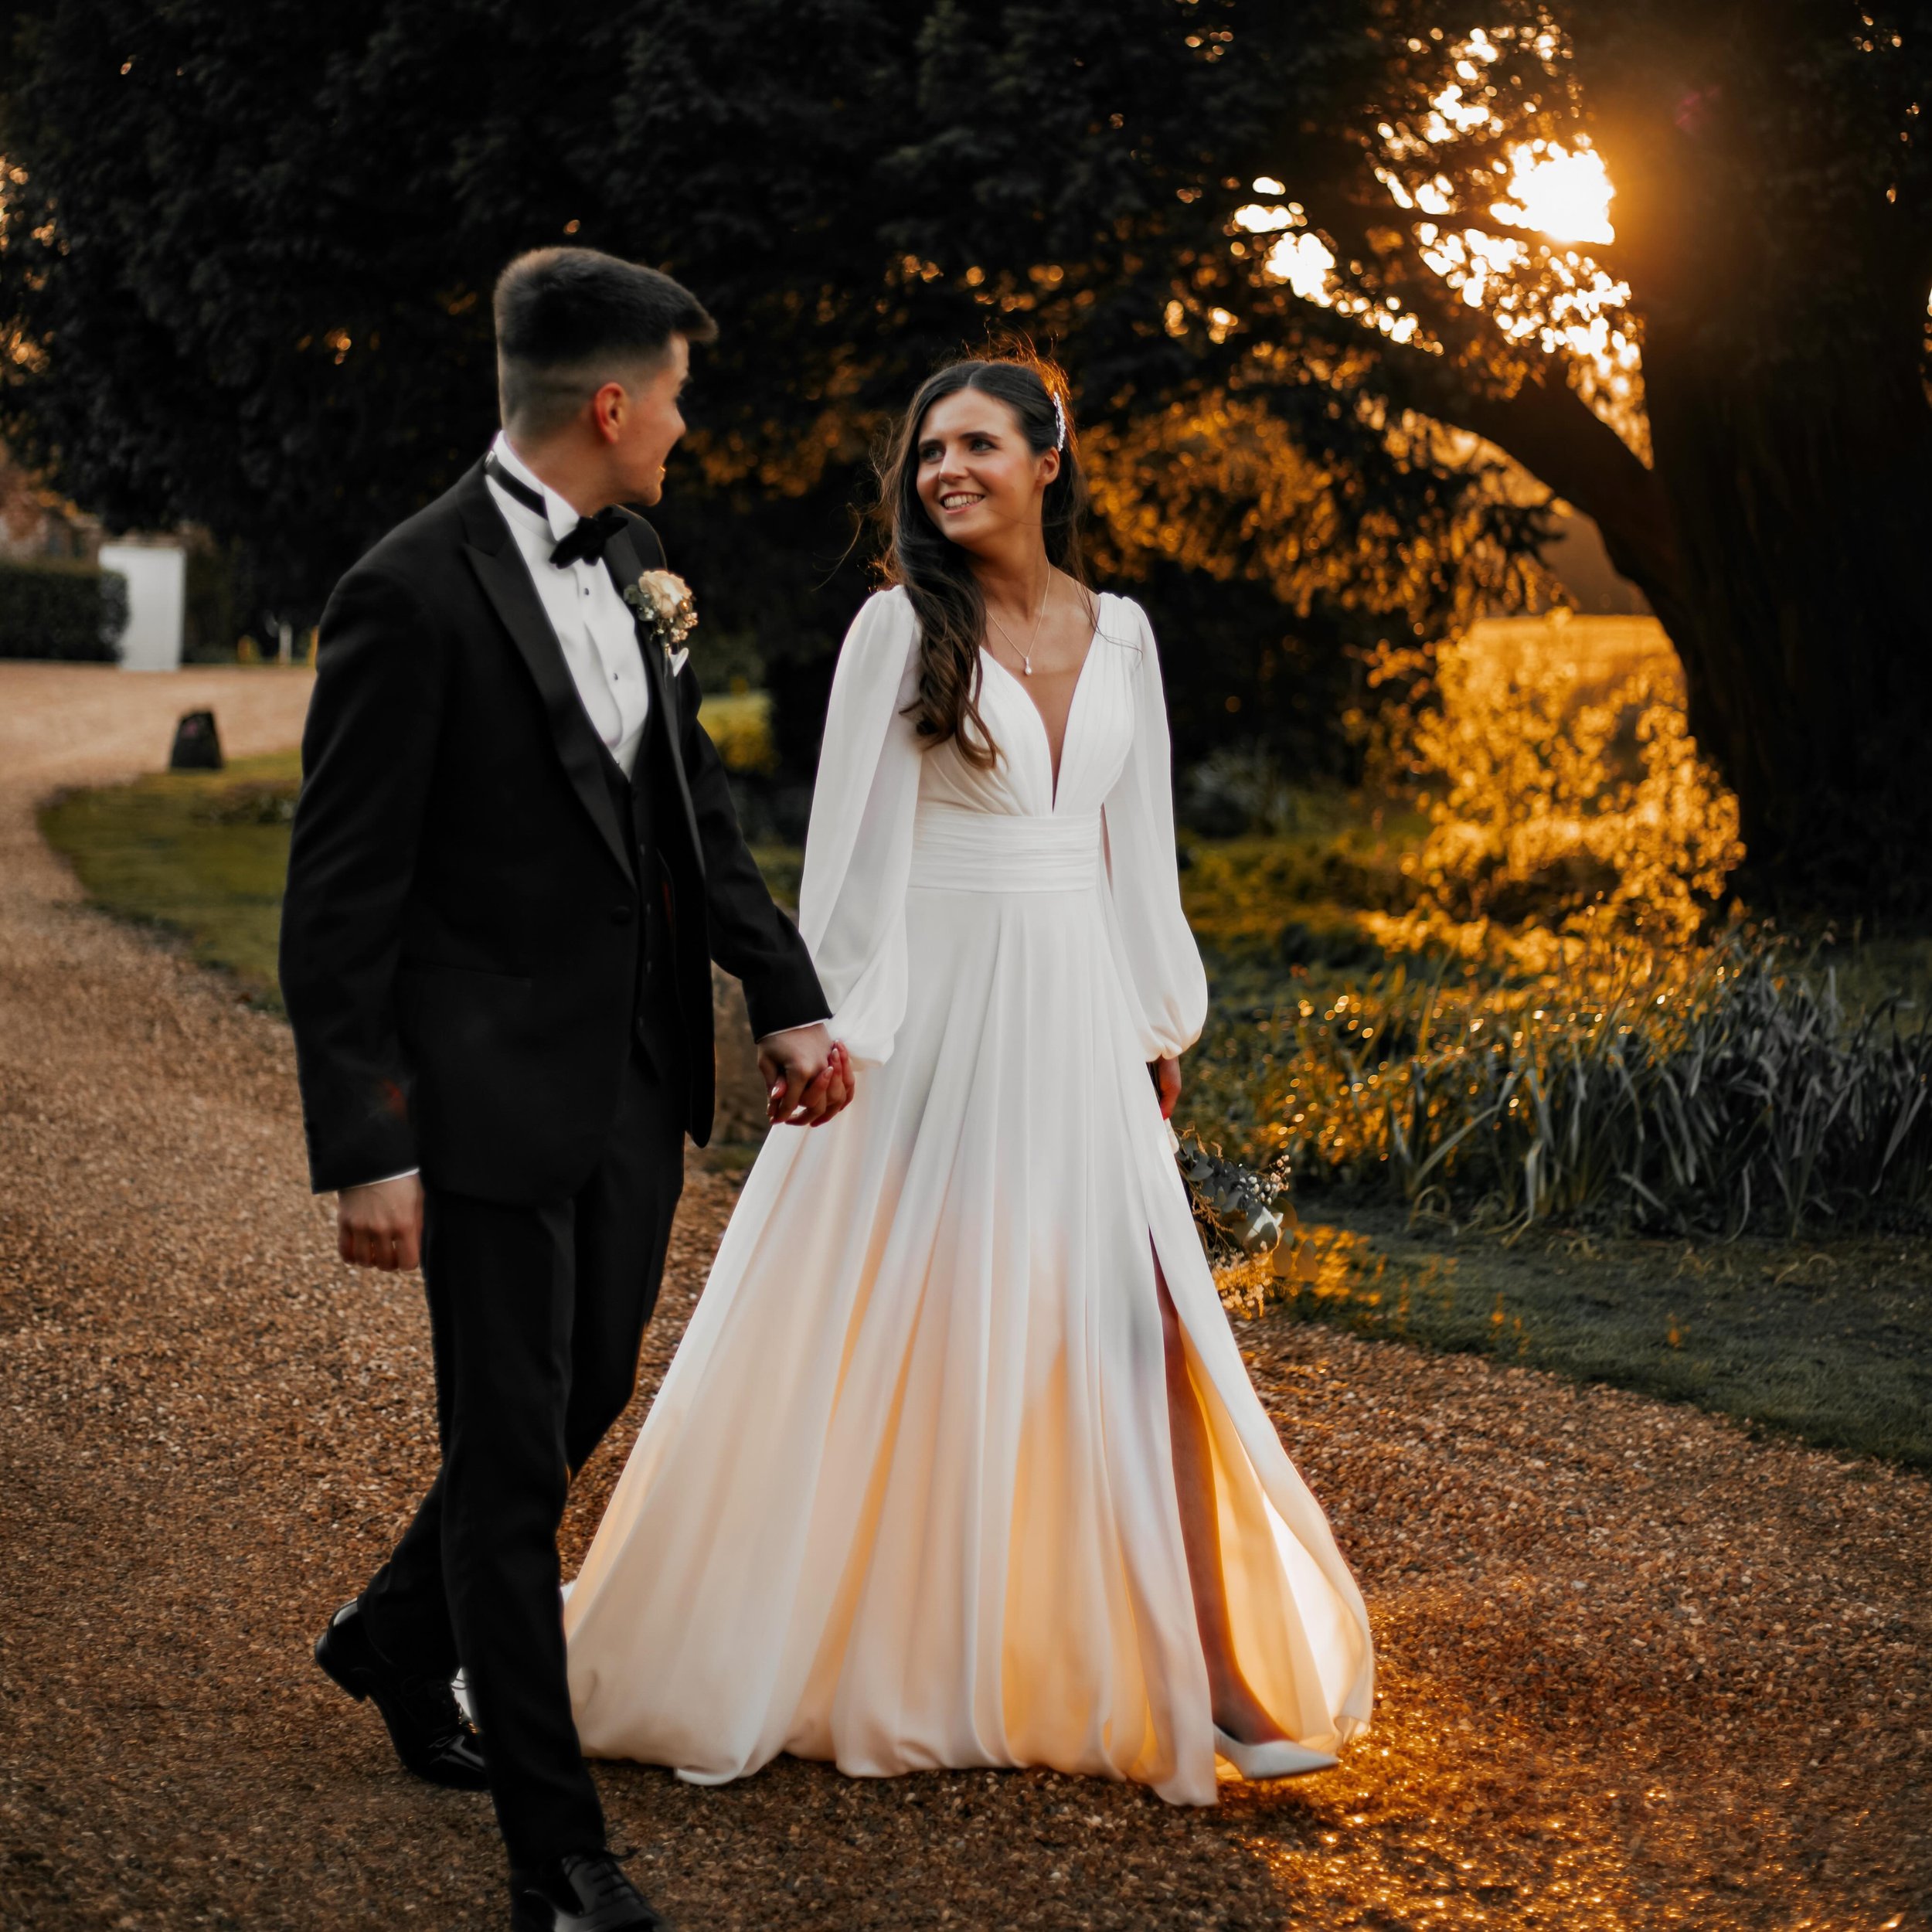 Bathed in the warm glow of love and reflecting on your day so far, those golden hour hues will always be a perfect opportunity to capture those special moments together ✨
.
.
.
.
.

@syrencot 
@thebridalmill_botley 
@amazing_facedorset 
@shirleysnell